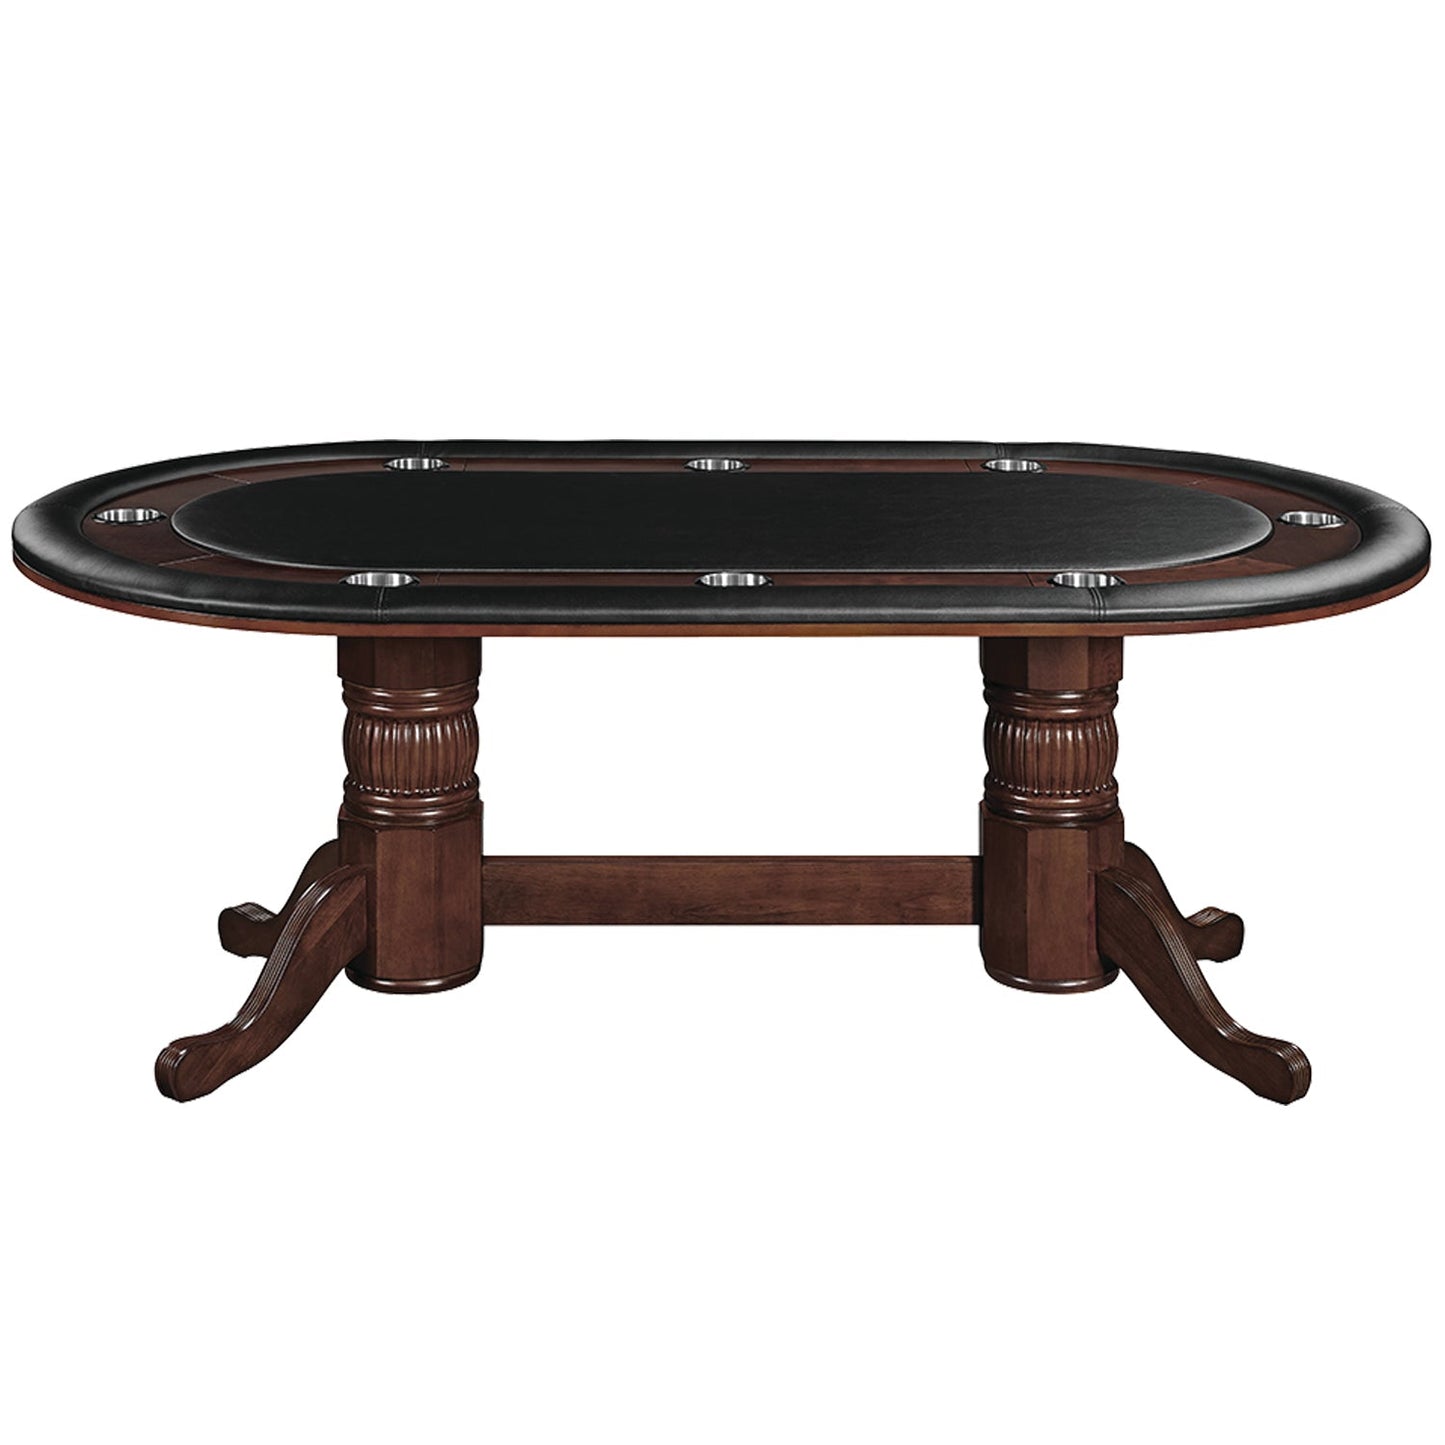 84" TEXAS HOLD'EM GAME TABLE - CAPPUCCINO